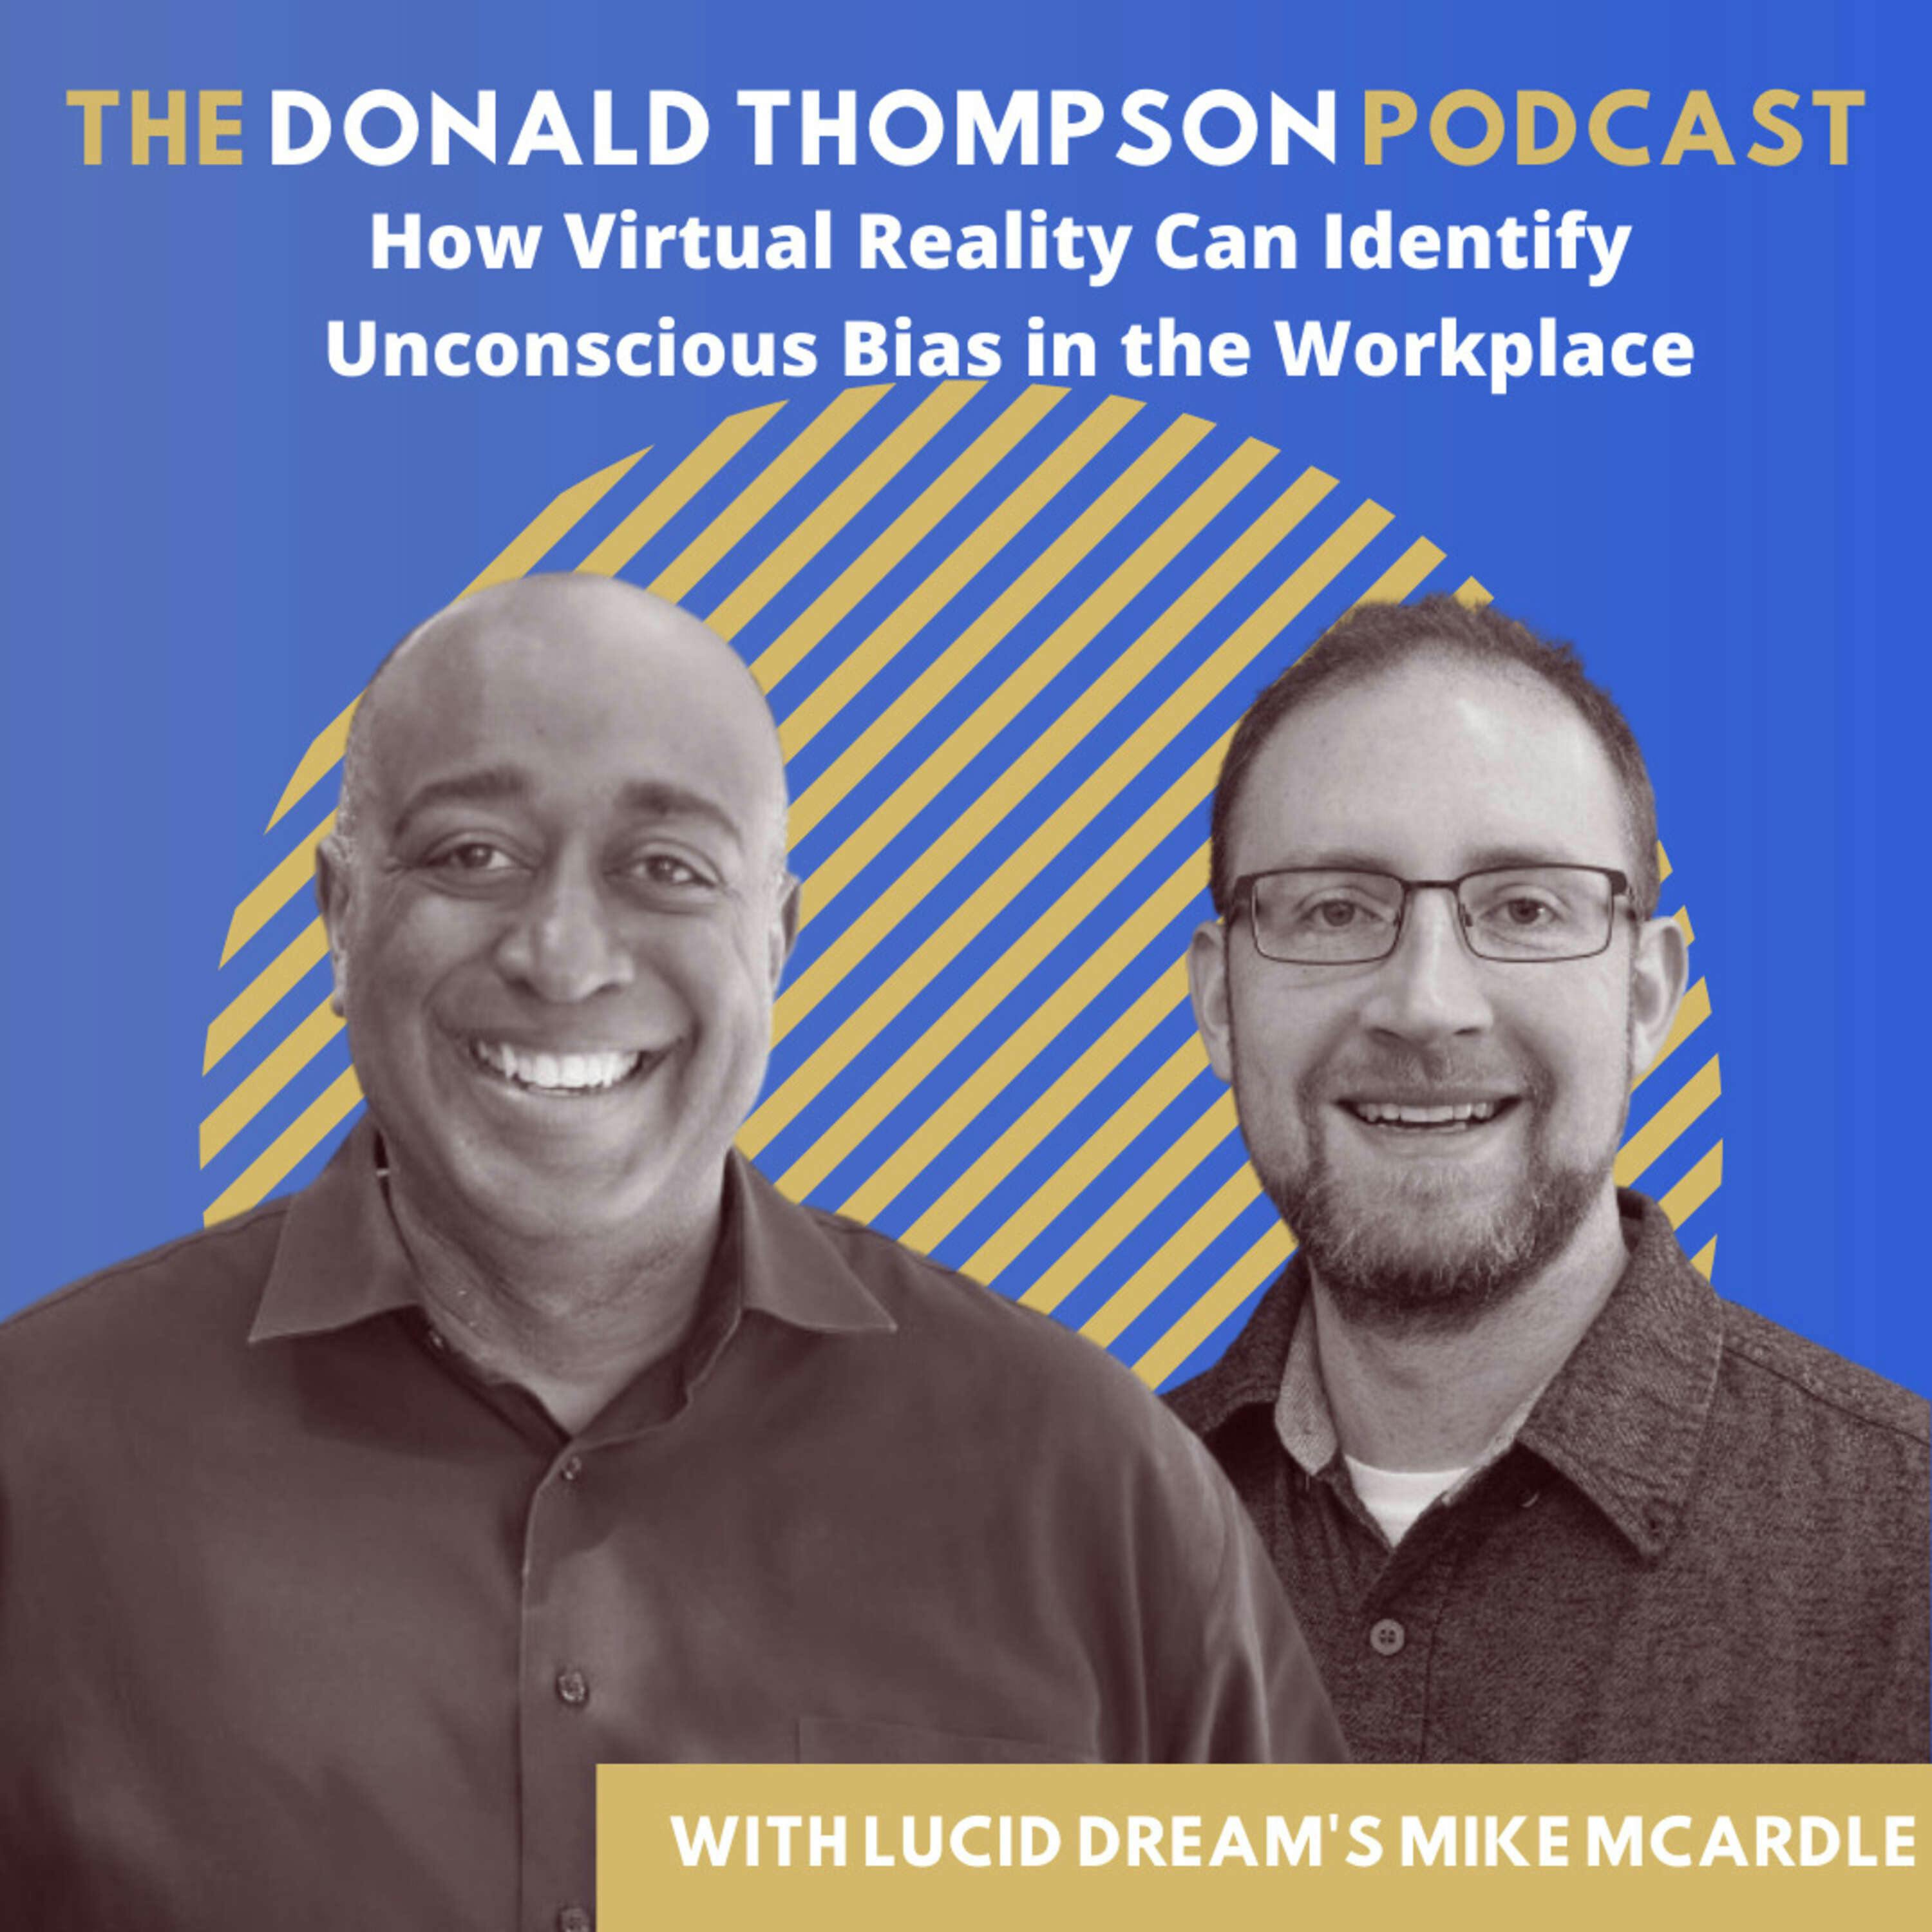 How Virtual Reality Can Identify Unconscious Bias in the Workplace, with Lucid Dream’s Mike McArdle